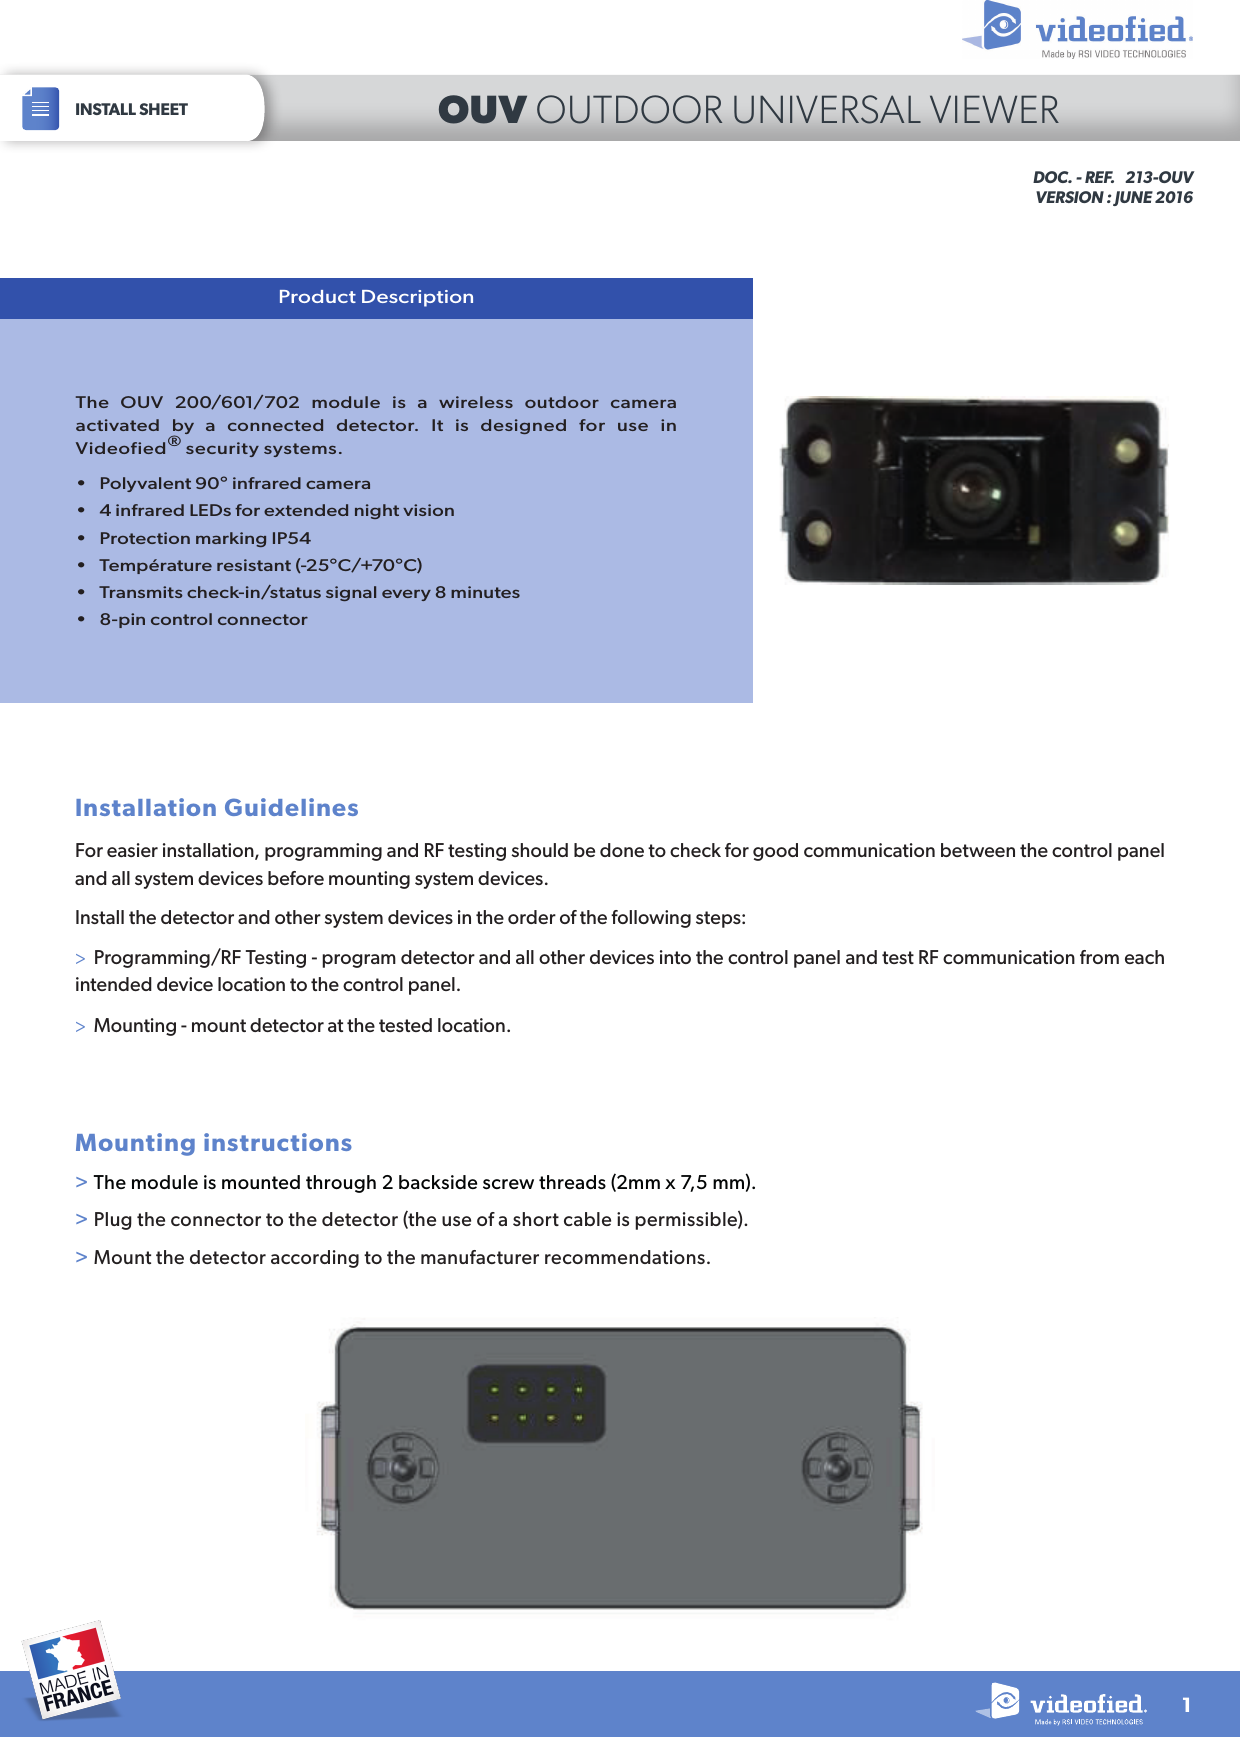 The OUV 200/601/702 module is a wireless outdoor camera activated by a connected detector. It is designed for use in Videofied® security systems.•  Polyvalent 90° infrared camera•  4 infrared LEDs for extended night vision•  Protection marking IP54•  Température resistant (-25°C/+70°C)•  Transmits check-in/status signal every 8 minutes•  8-pin control connectorProduct DescriptionInstallation GuidelinesFor easier installation, programming and RF testing should be done to check for good communication between the control panel and all system devices before mounting system devices. Install the detector and other system devices in the order of the following steps:&gt;  Programming/RF Testing - program detector and all other devices into the control panel and test RF communication from each intended device location to the control panel.&gt;  Mounting - mount detector at the tested location.Mounting instructions&gt; The module is mounted through 2 backside screw threads (2mm x 7,5 mm).&gt; Plug the connector to the detector (the use of a short cable is permissible).&gt; Mount the detector according to the manufacturer recommendations.DOC. - REF.   213-OUVVERSION : JUNE 20161INSTALL SHEET OUV OUTDOOR UNIVERSAL VIEWER